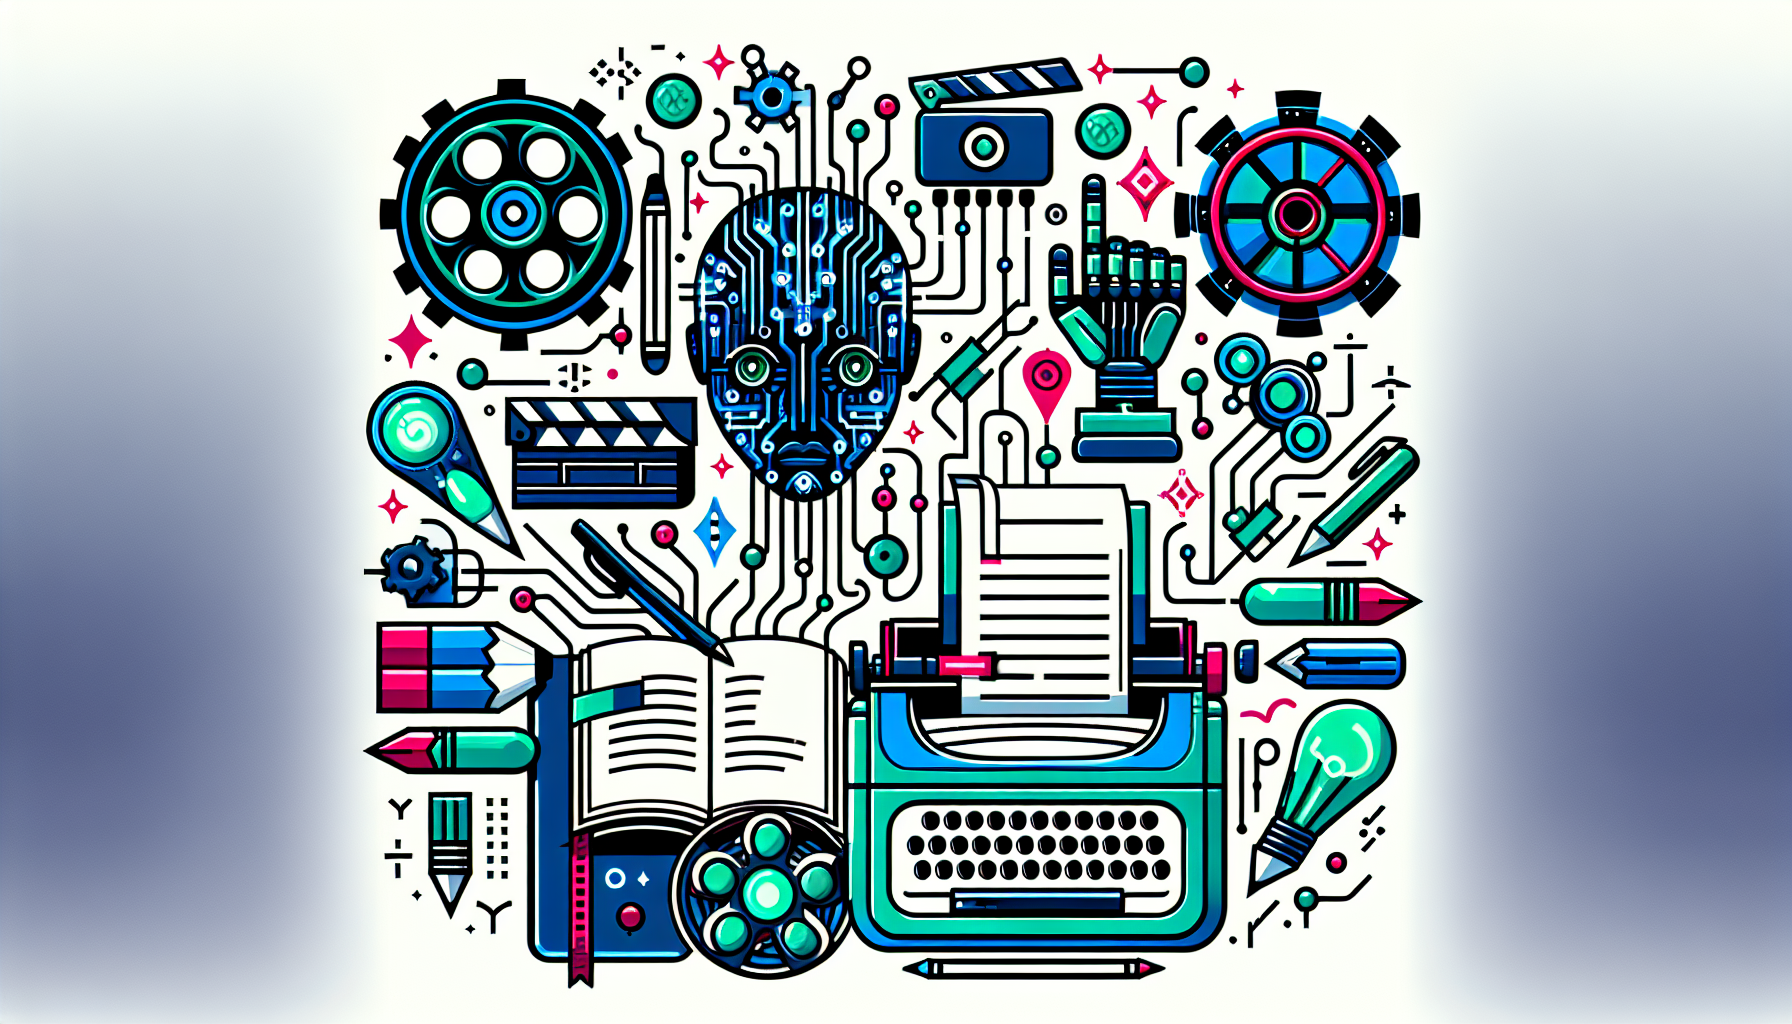 An illustration that represents the concept of 'Exploring AI Screenwriting' with a modern twist. This image should not contain any text or words. Display the elements of scriptwriting such as a notebook, pen, film reel, or typewriter, intertwined with symbols of artificial intelligence like circuit boards, binary codes, or robotic hands. The color scheme should be vibrant and contemporary, suggesting the merging of traditional scriptwriting with the future of AI.